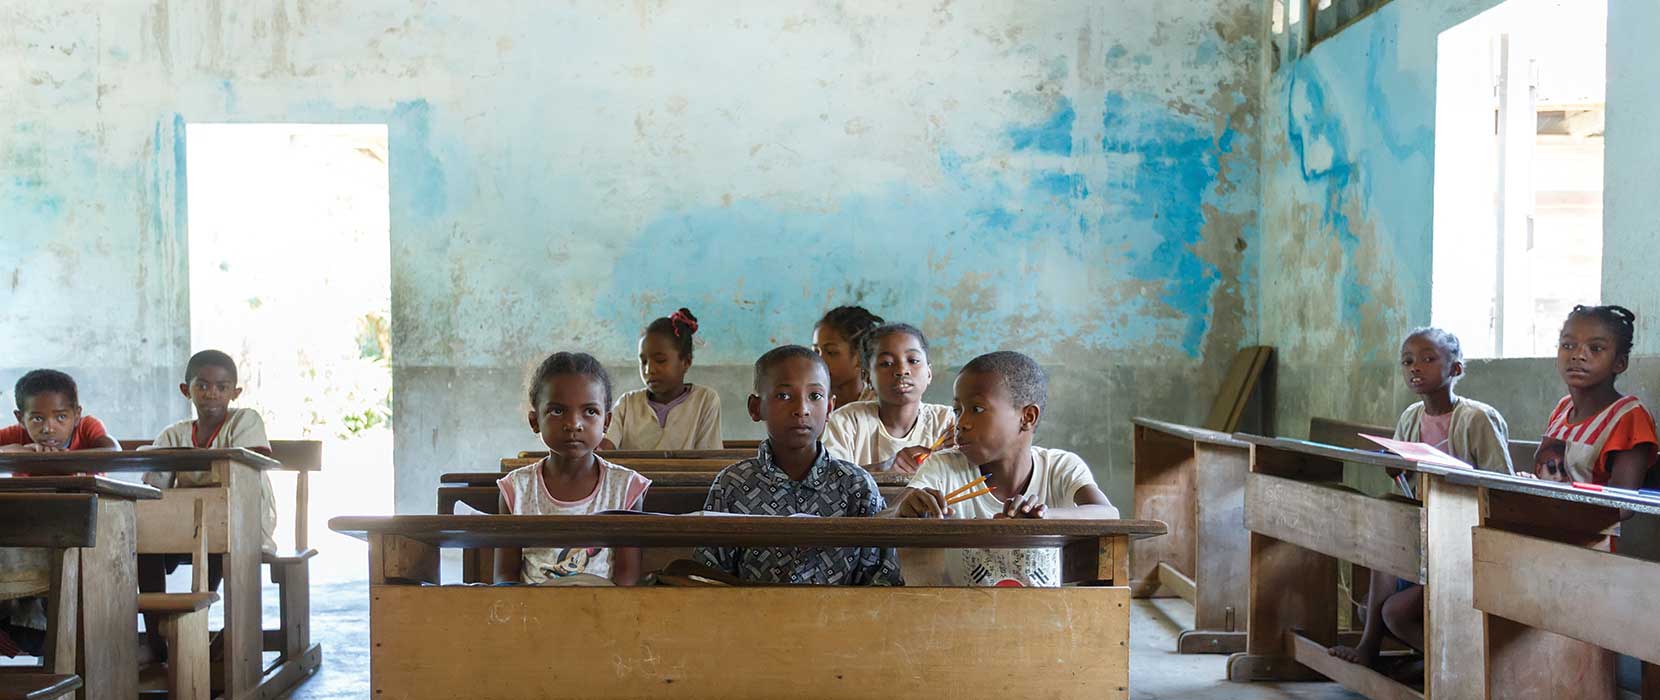 Malagasy school children sitting on desks in a basic room with rough plaster on the walls.